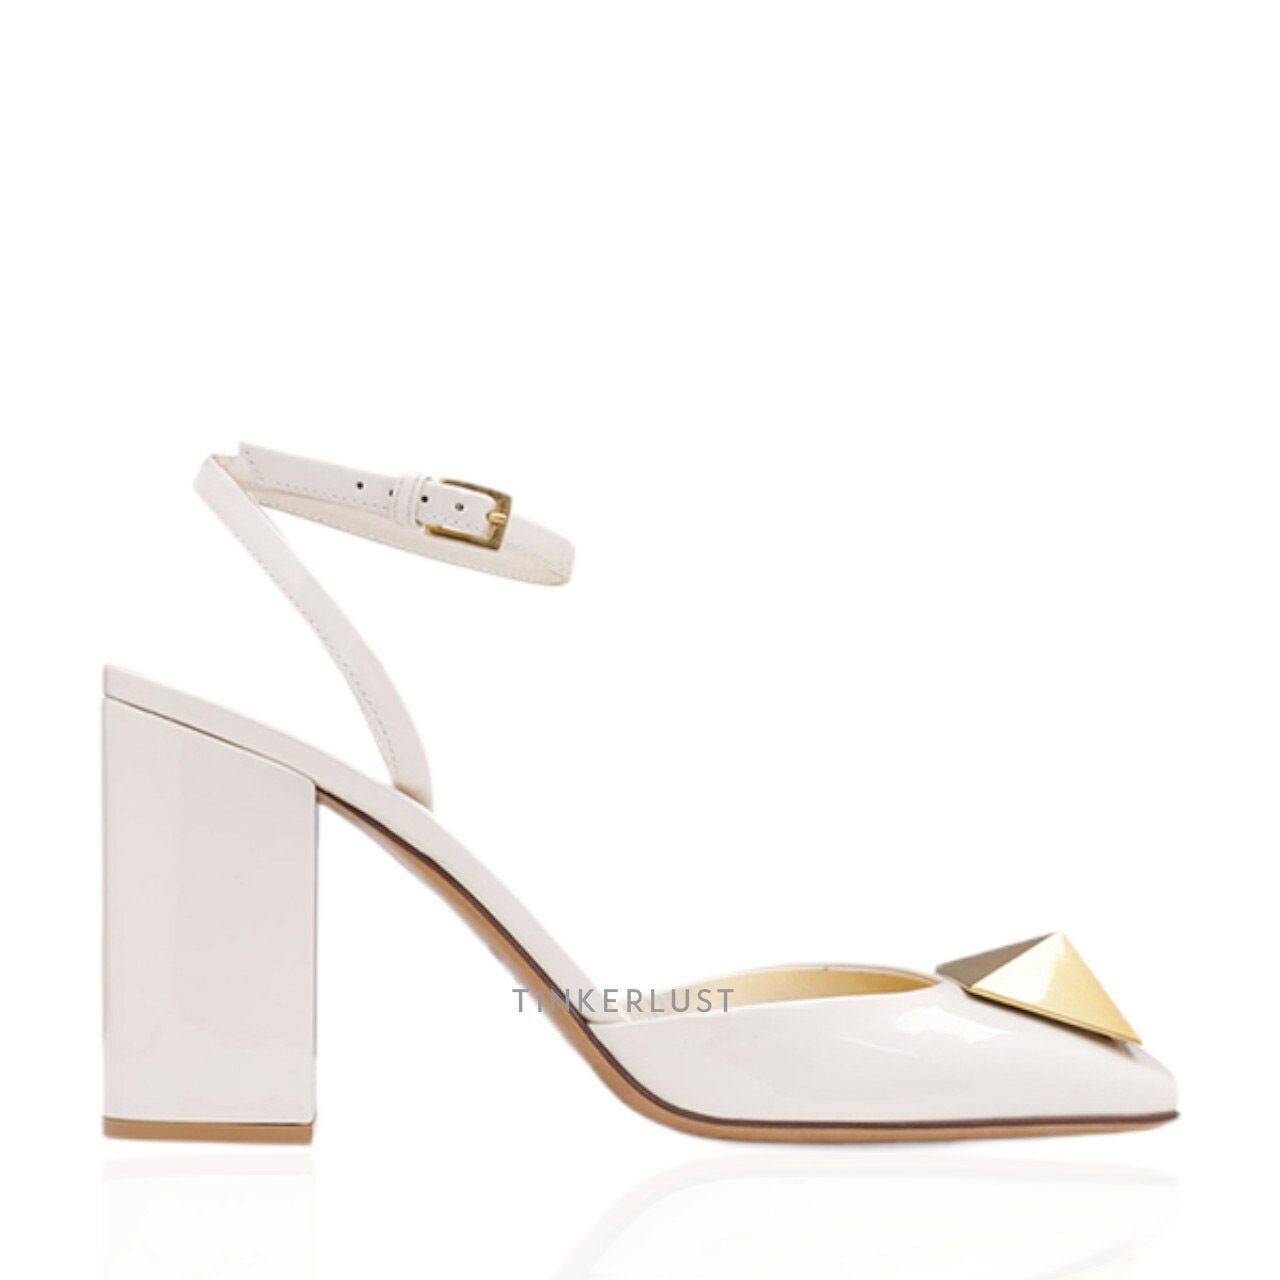 VALENTINO One Stud Pumps 90mm in Light Ivory Patent